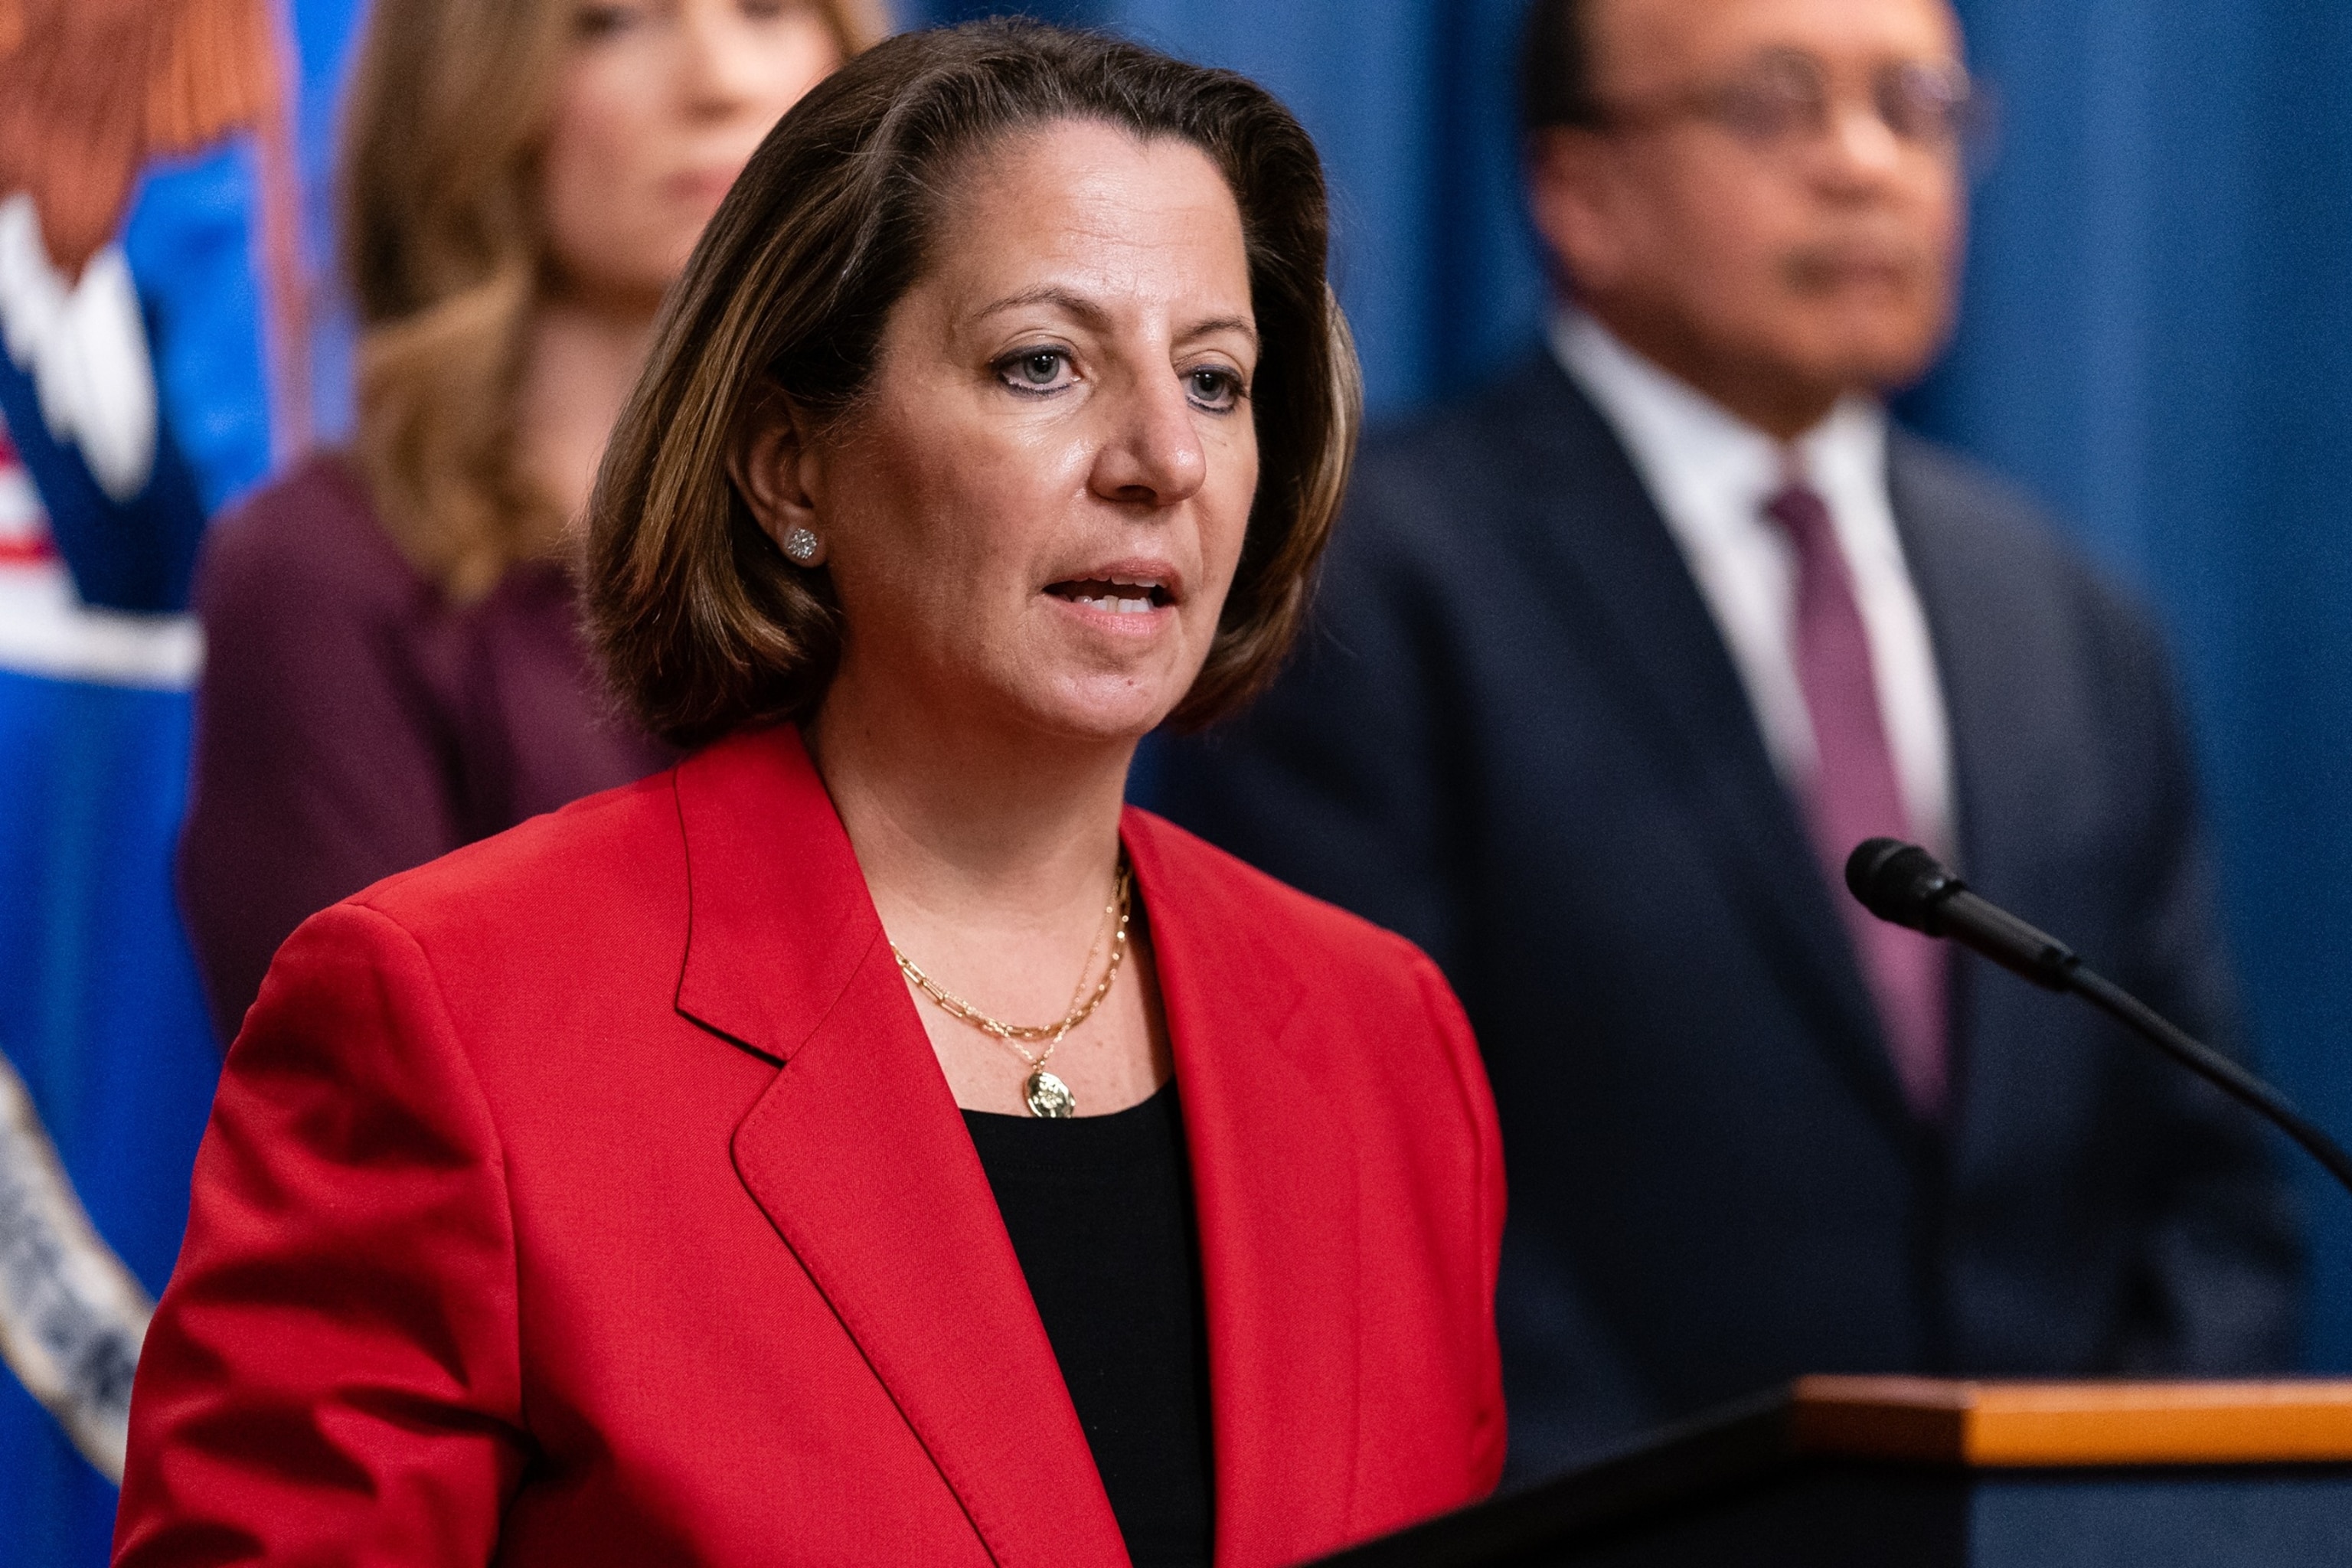 PHOTO: In this April 14, 2023, file photo, Lisa Monaco, deputy US attorney general, speaks during a news conference at the Department of Justice, in Washington, D.C.